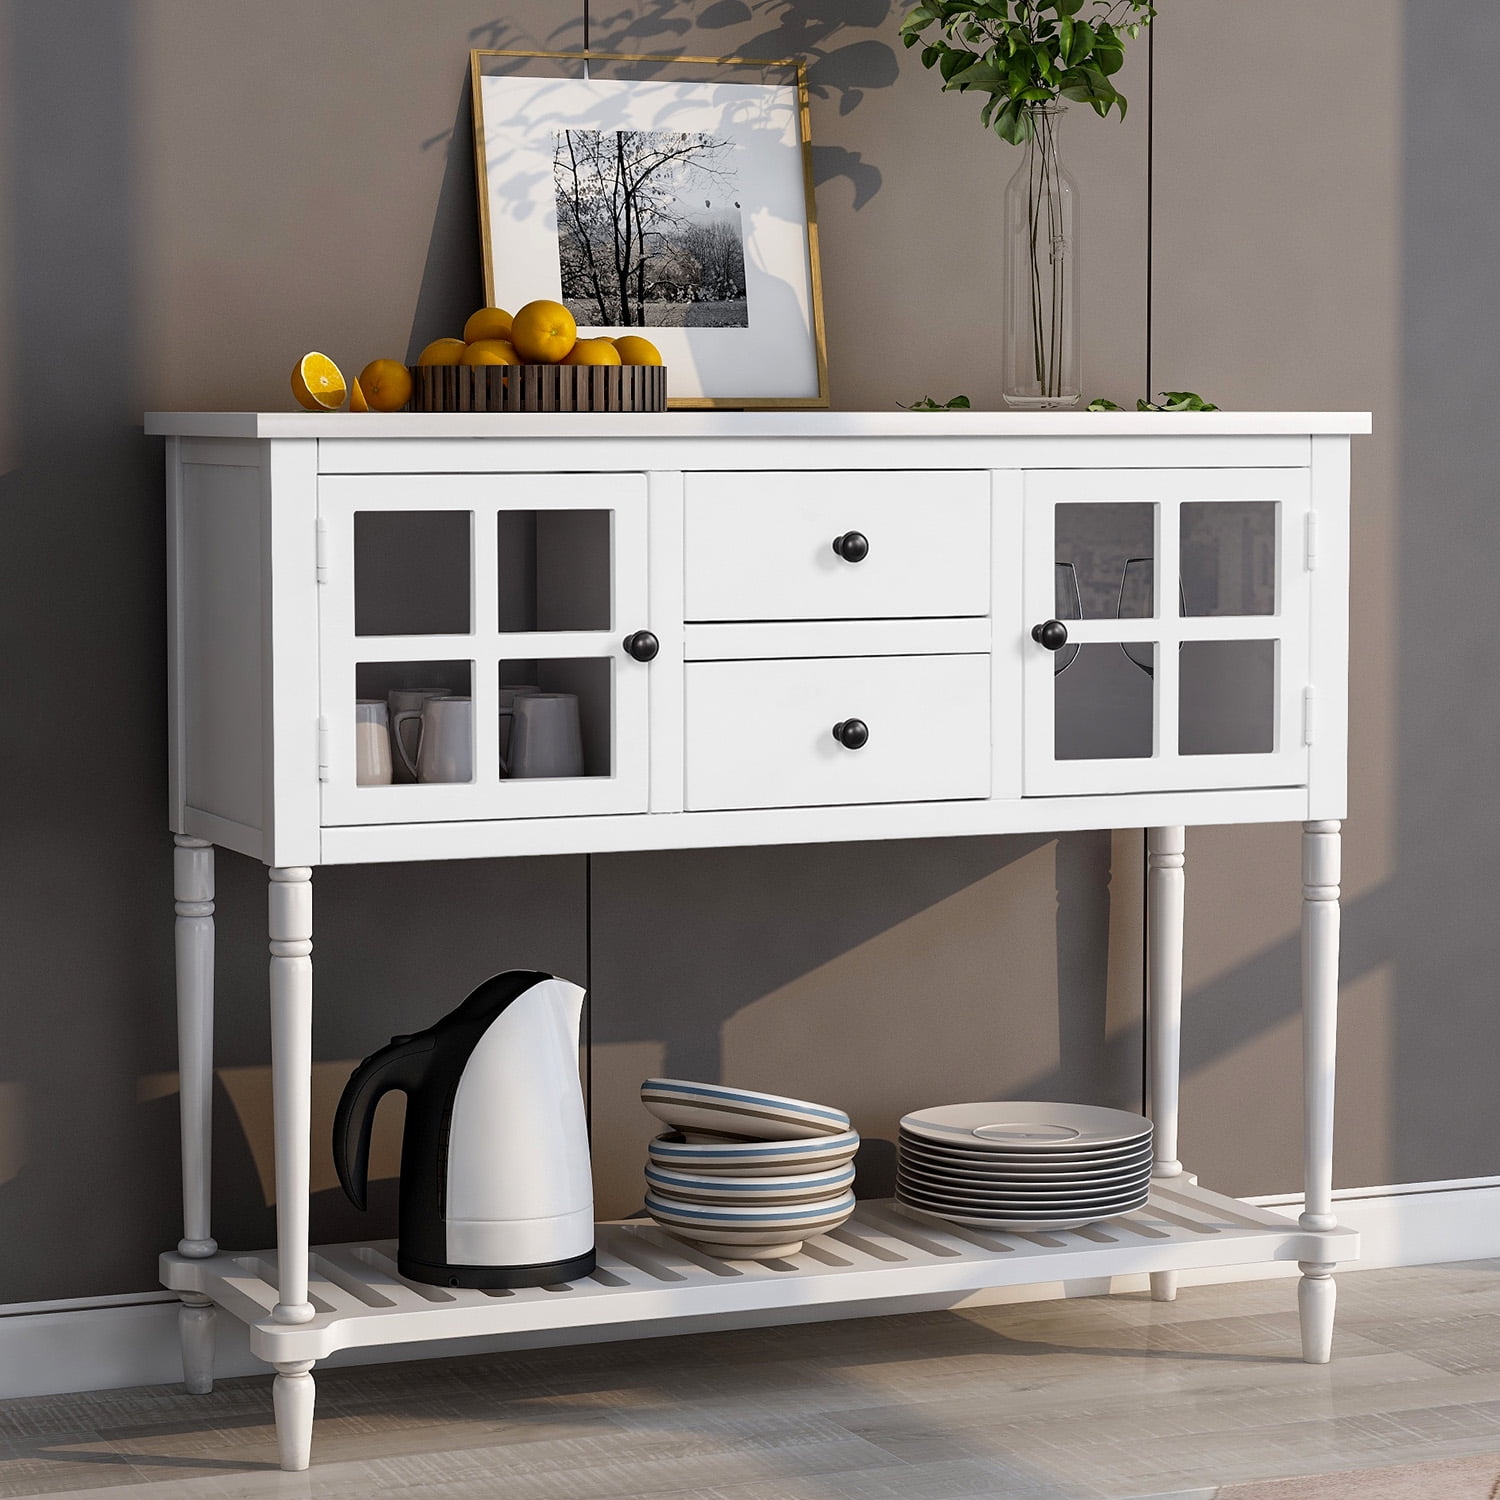 Details about   Wood/Glass Sideboard Buffet Console Table w/Shelf Drawer Cabinet Entryway Gray 